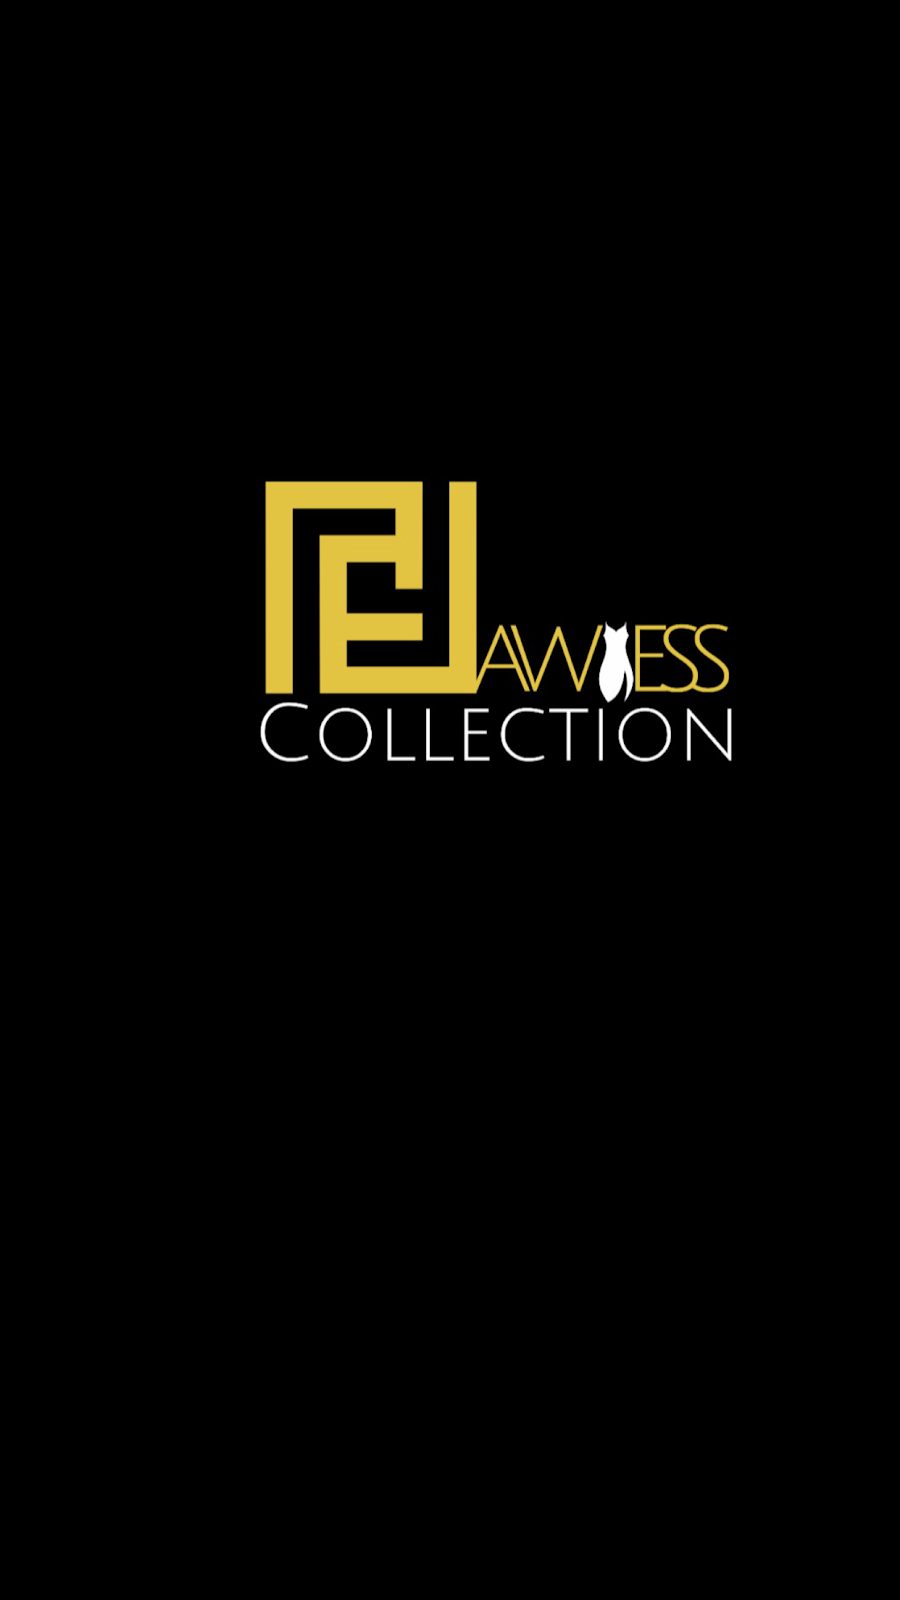 Flawless collection Llc | 5162 Warrensville Center Rd, Maple Heights, OH 44137 | Phone: (440) 340-3045